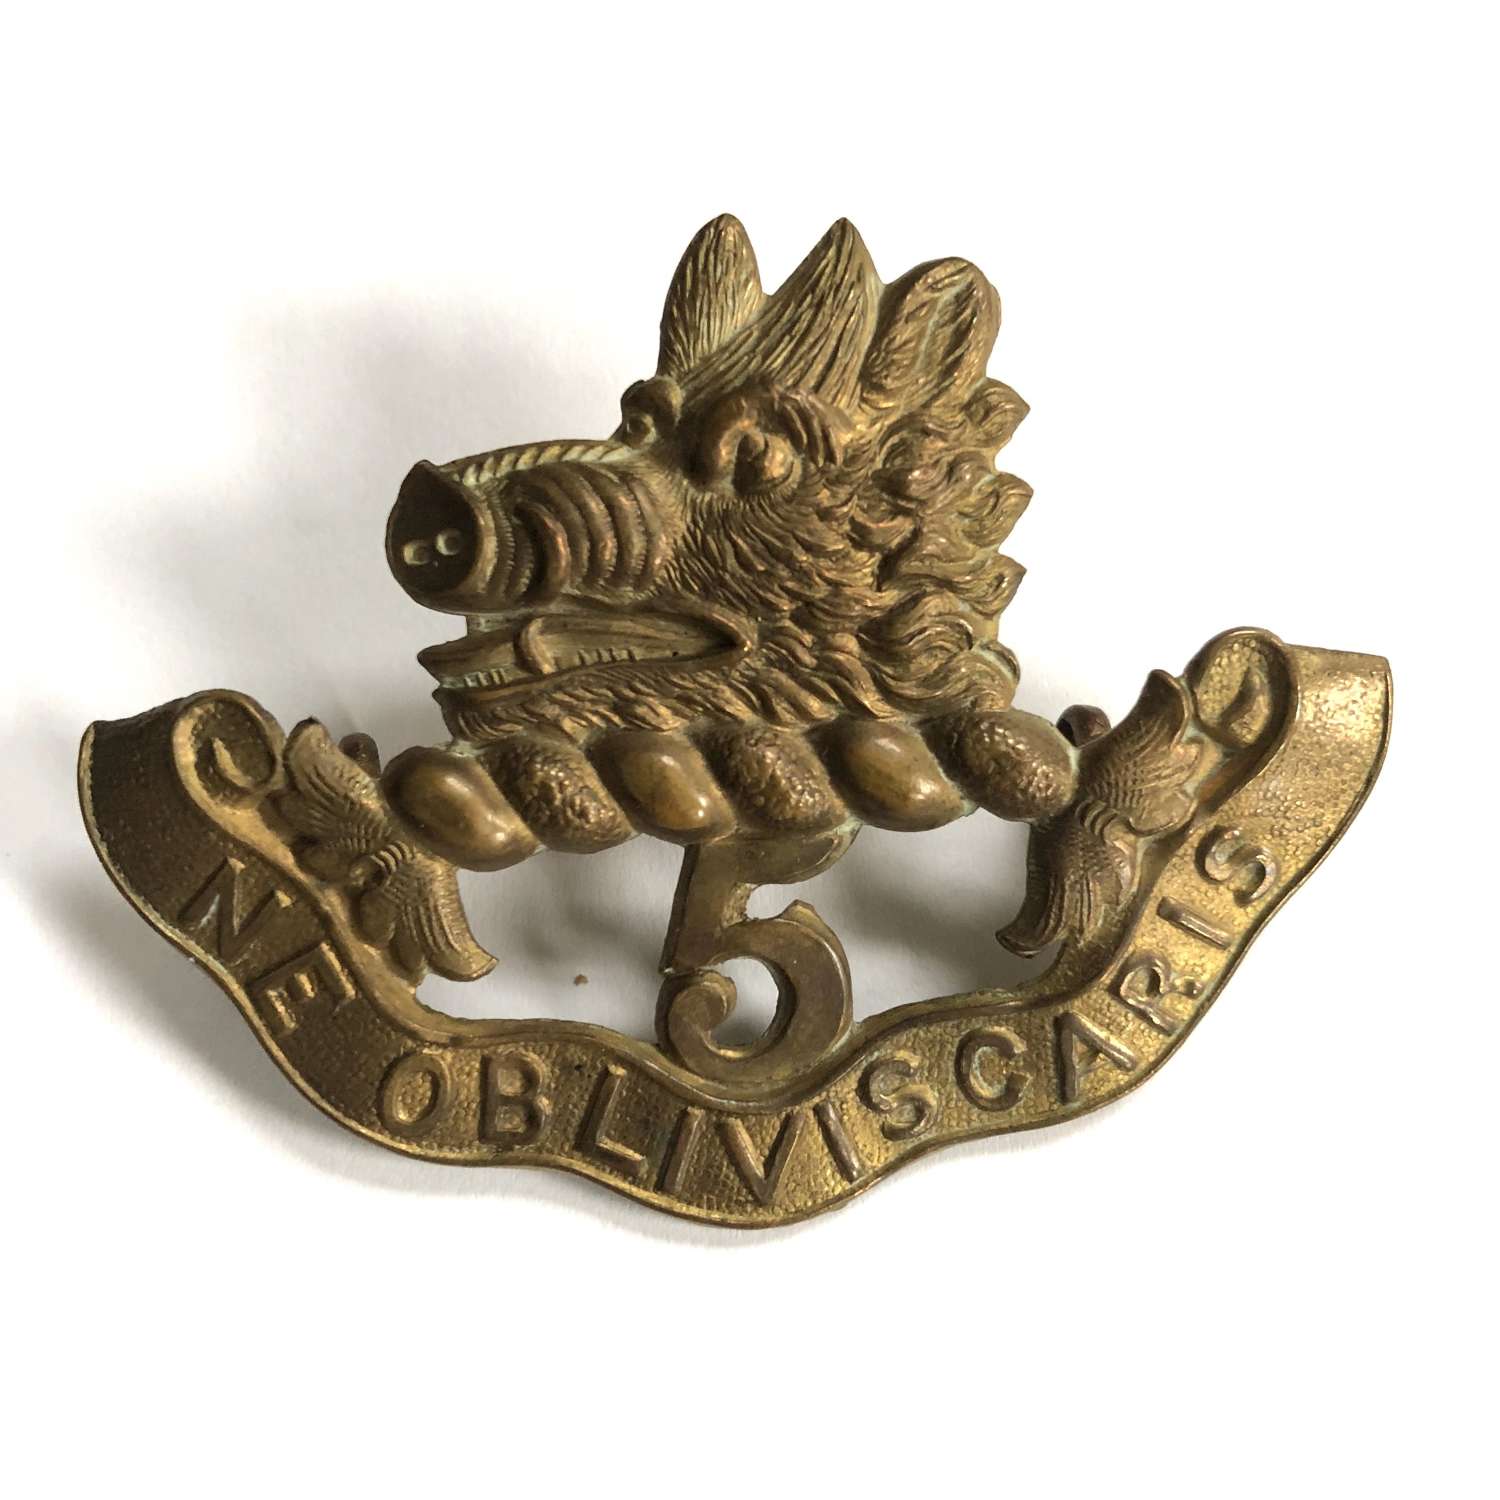 Canadian. 5th Bn. Royal Scots of Canada Victorian  glengarry badge